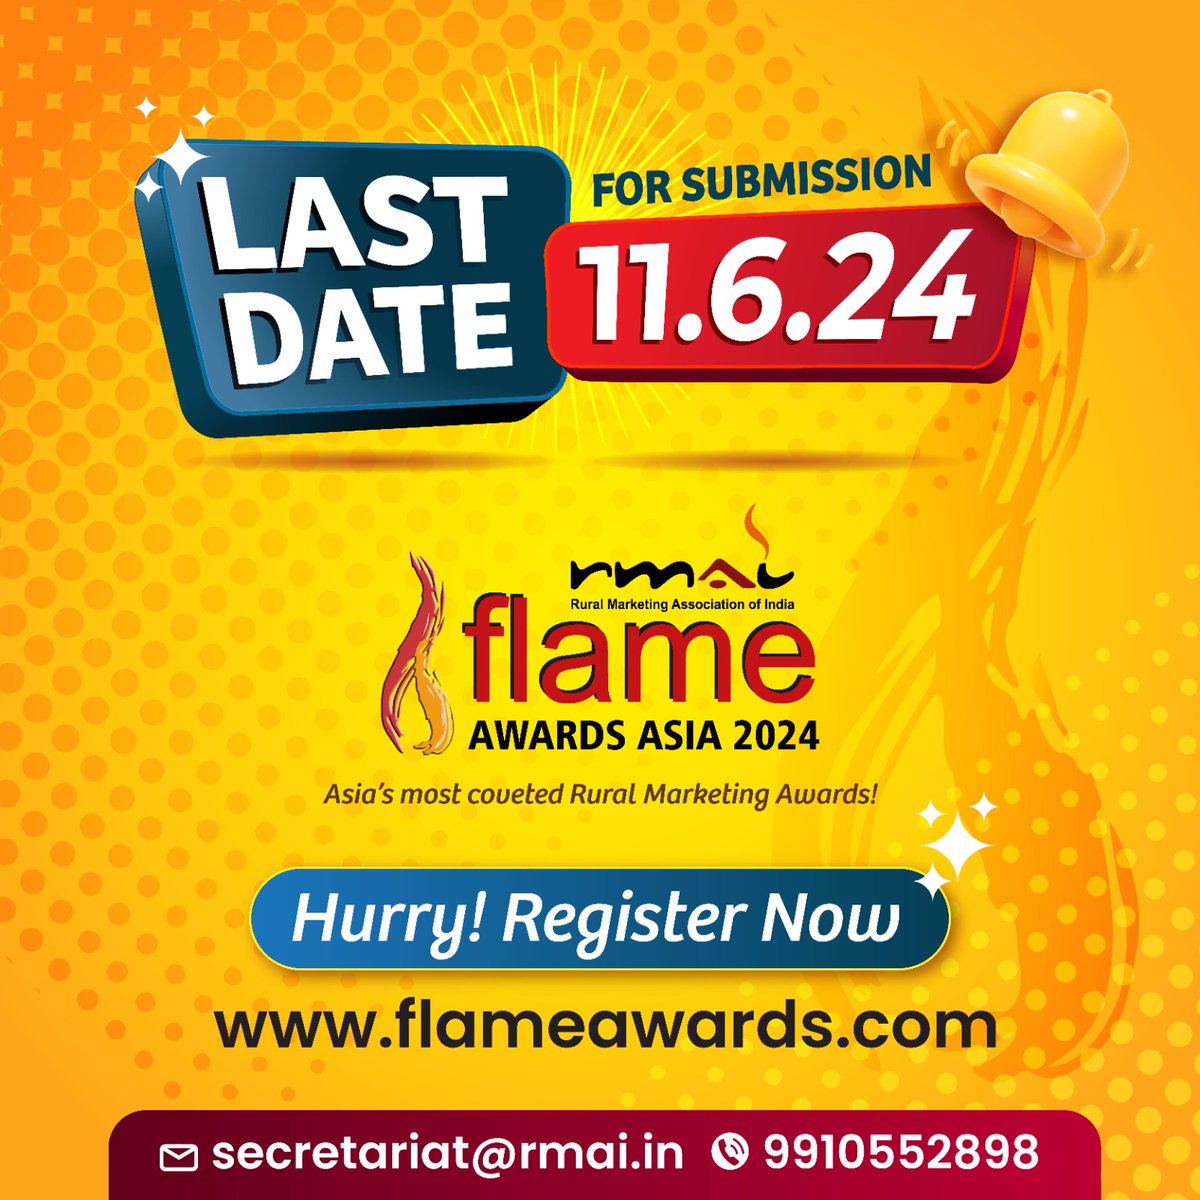 FLAME AWARDS ASIA 2024
Hardly any days left!!  We are waiting for your entries...
Register now flameawards.com
#flameawardsasia2024 #ruralmarketingawards #marketingagency #marketingcompany #ruralentriesinvited #rmaiflameawards